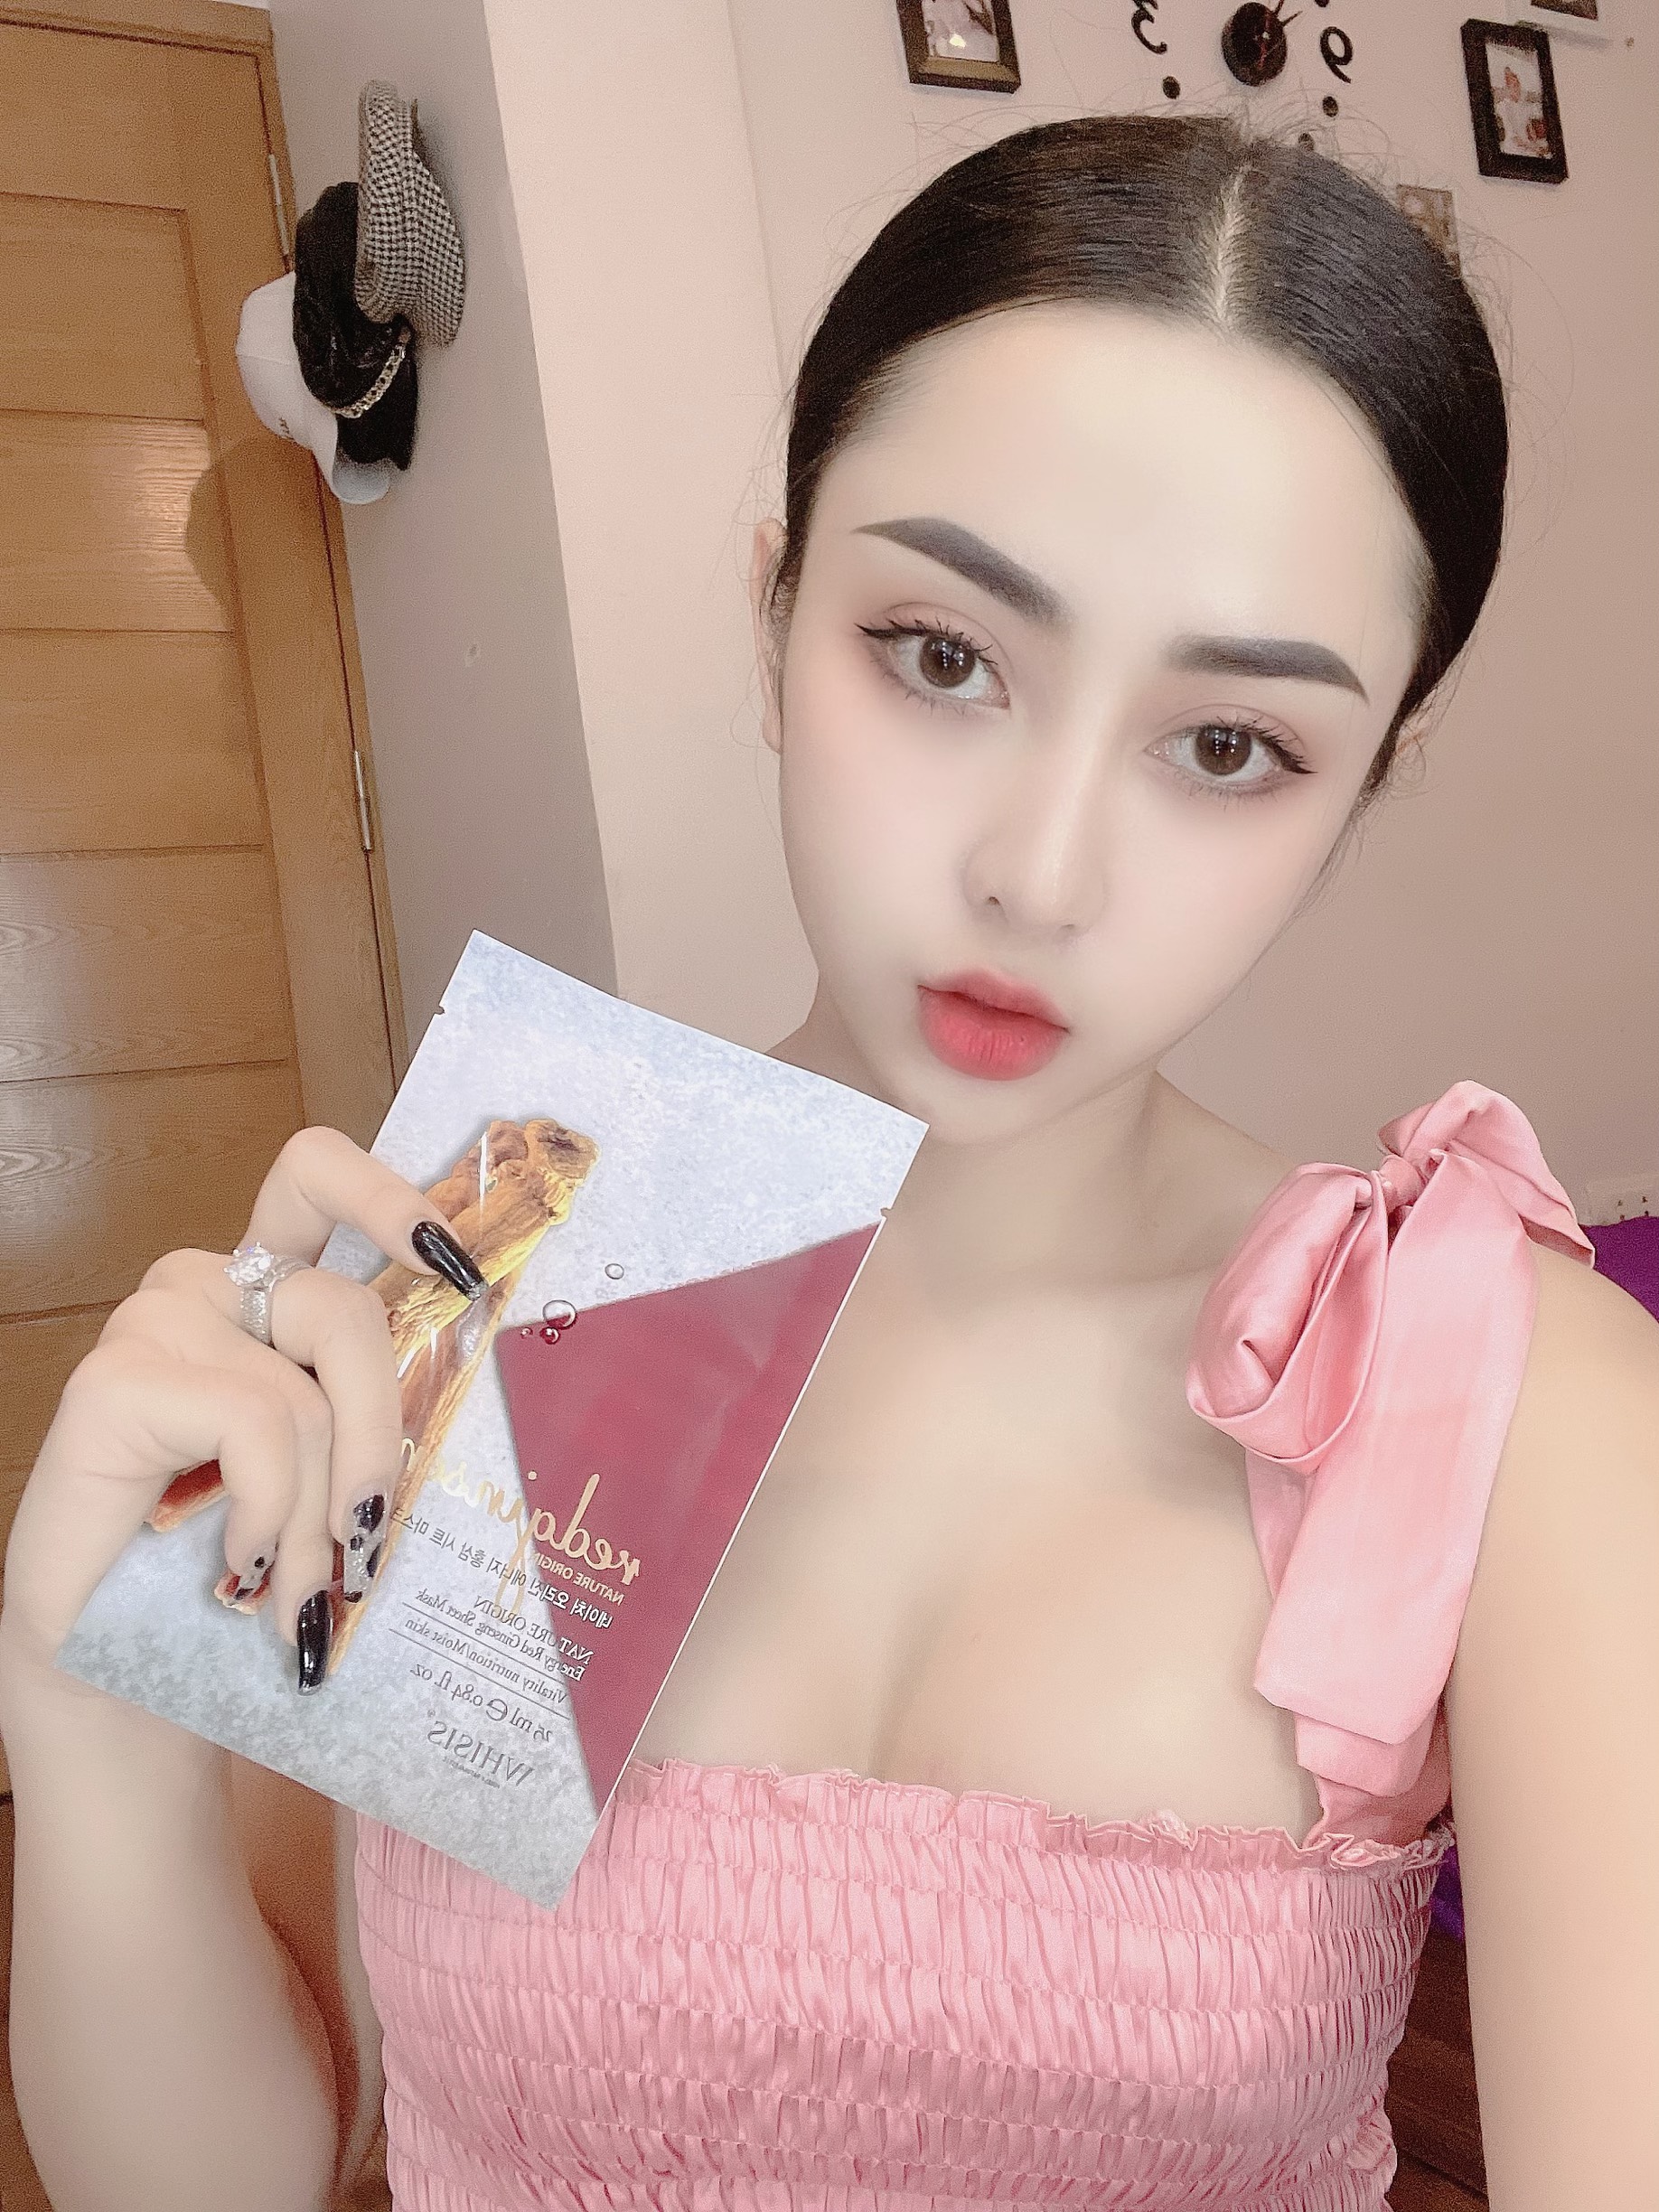 Mặt nạ hồng sâm Whisis Nature Origin Energy Red ginseng Sheet Mask